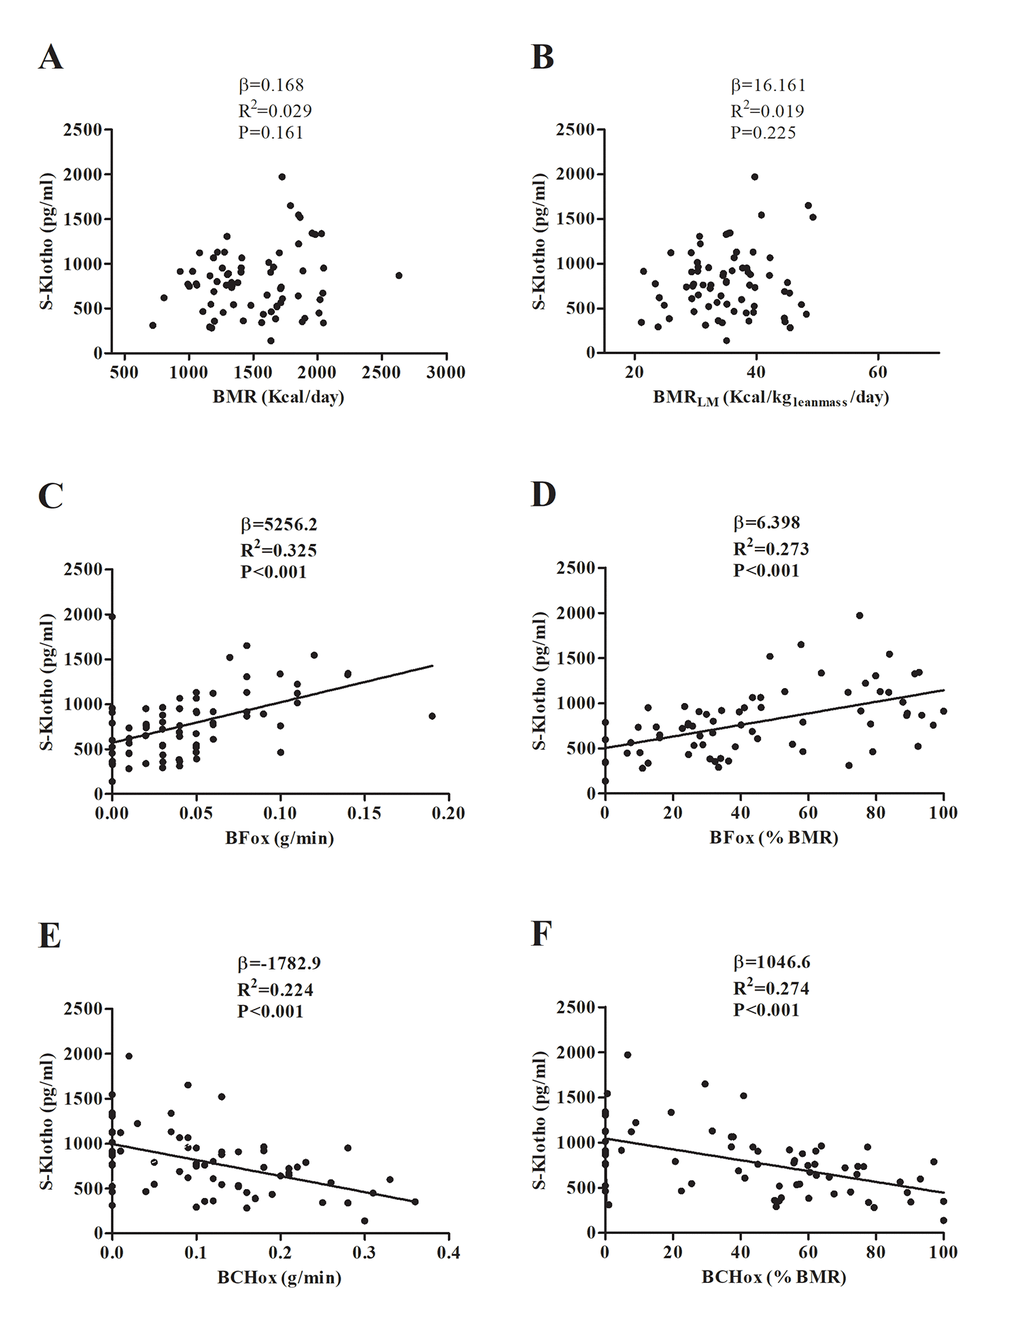 Association between basal metabolic rate (BMR) (A, B), basal fat oxidation (BFox) (C, D) and basal carbohydrate oxidation (BCHox) (E, F) with plasma S-klotho levels. β (unstandardized regression coefficient), R2, and P are from simple linear regression analysis. Abbreviations: BMRLM; Basal Metabolic Rate relative to lean mass.